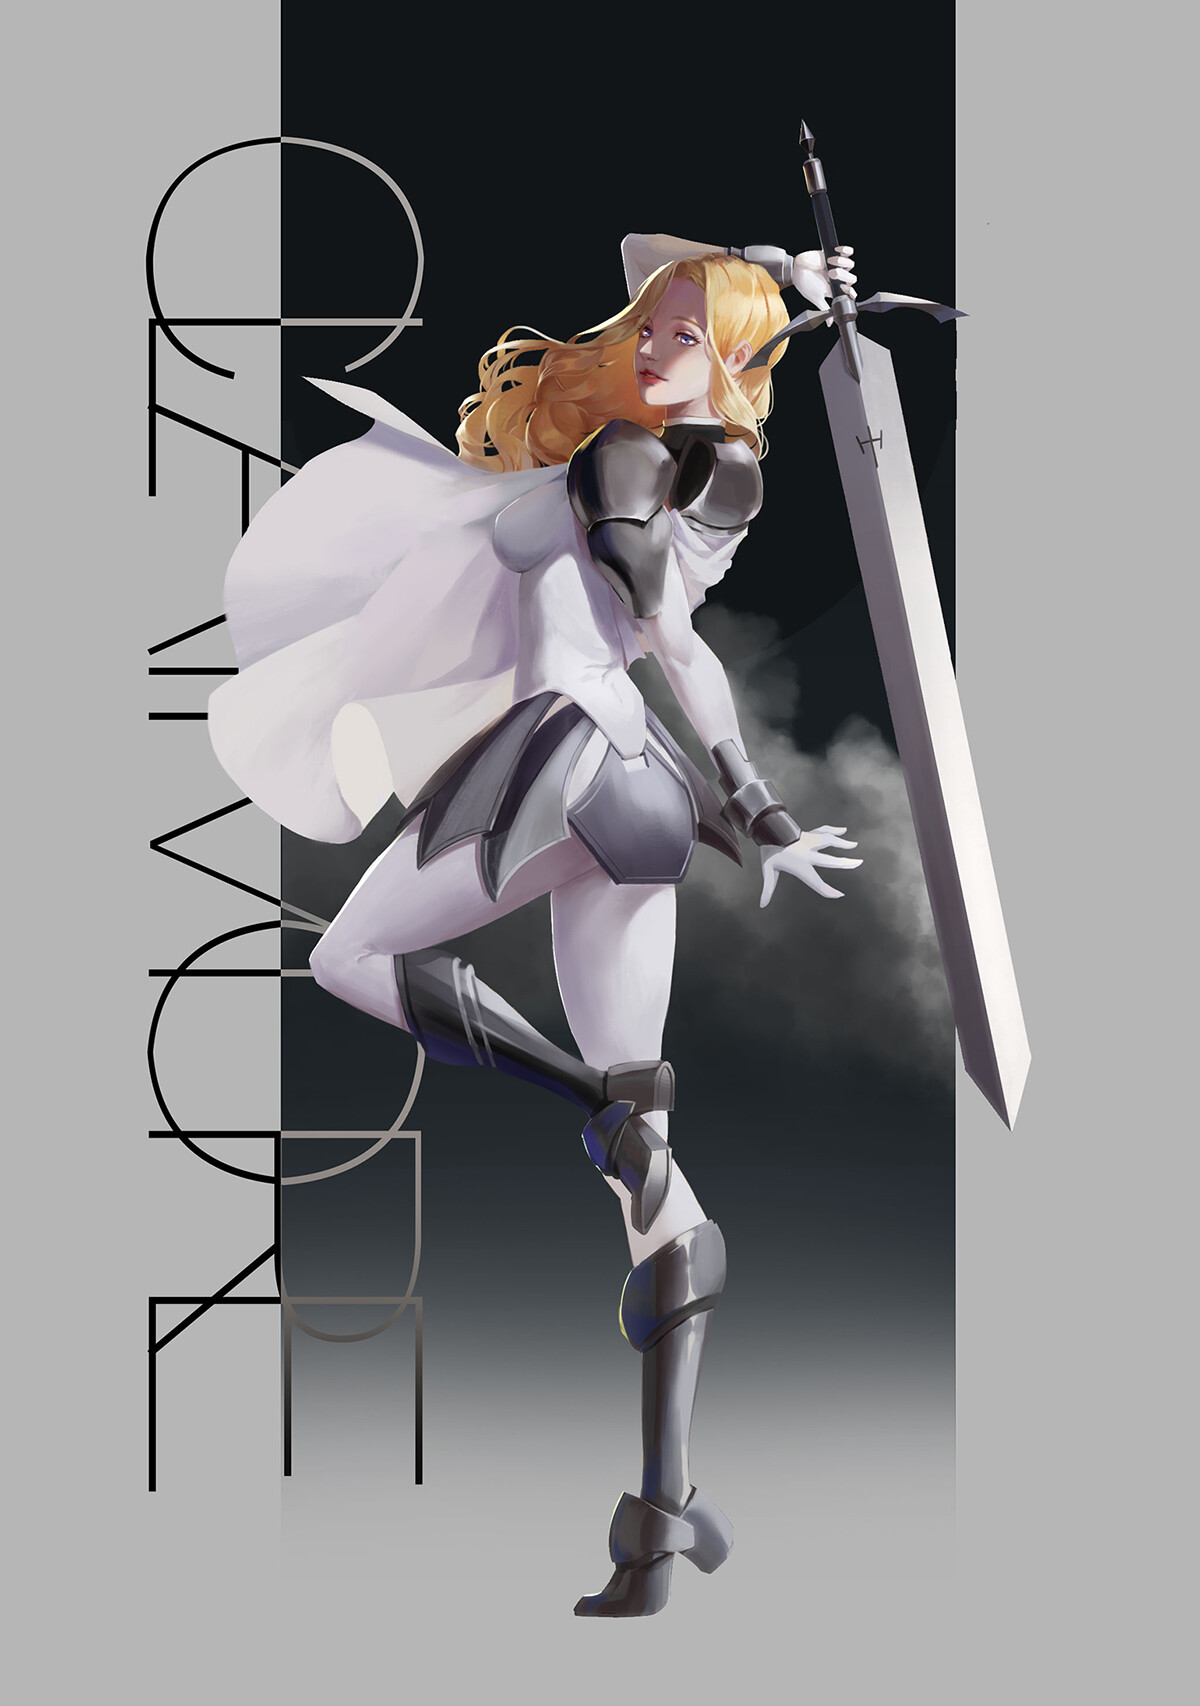 Anime 1200x1706 Claymore (anime) anime girls armor big boobs thighs 2D portrait display women with swords female warrior long hair looking at viewer Teresa (Claymore) bodysuit fan art red lipstick underboob anime blonde